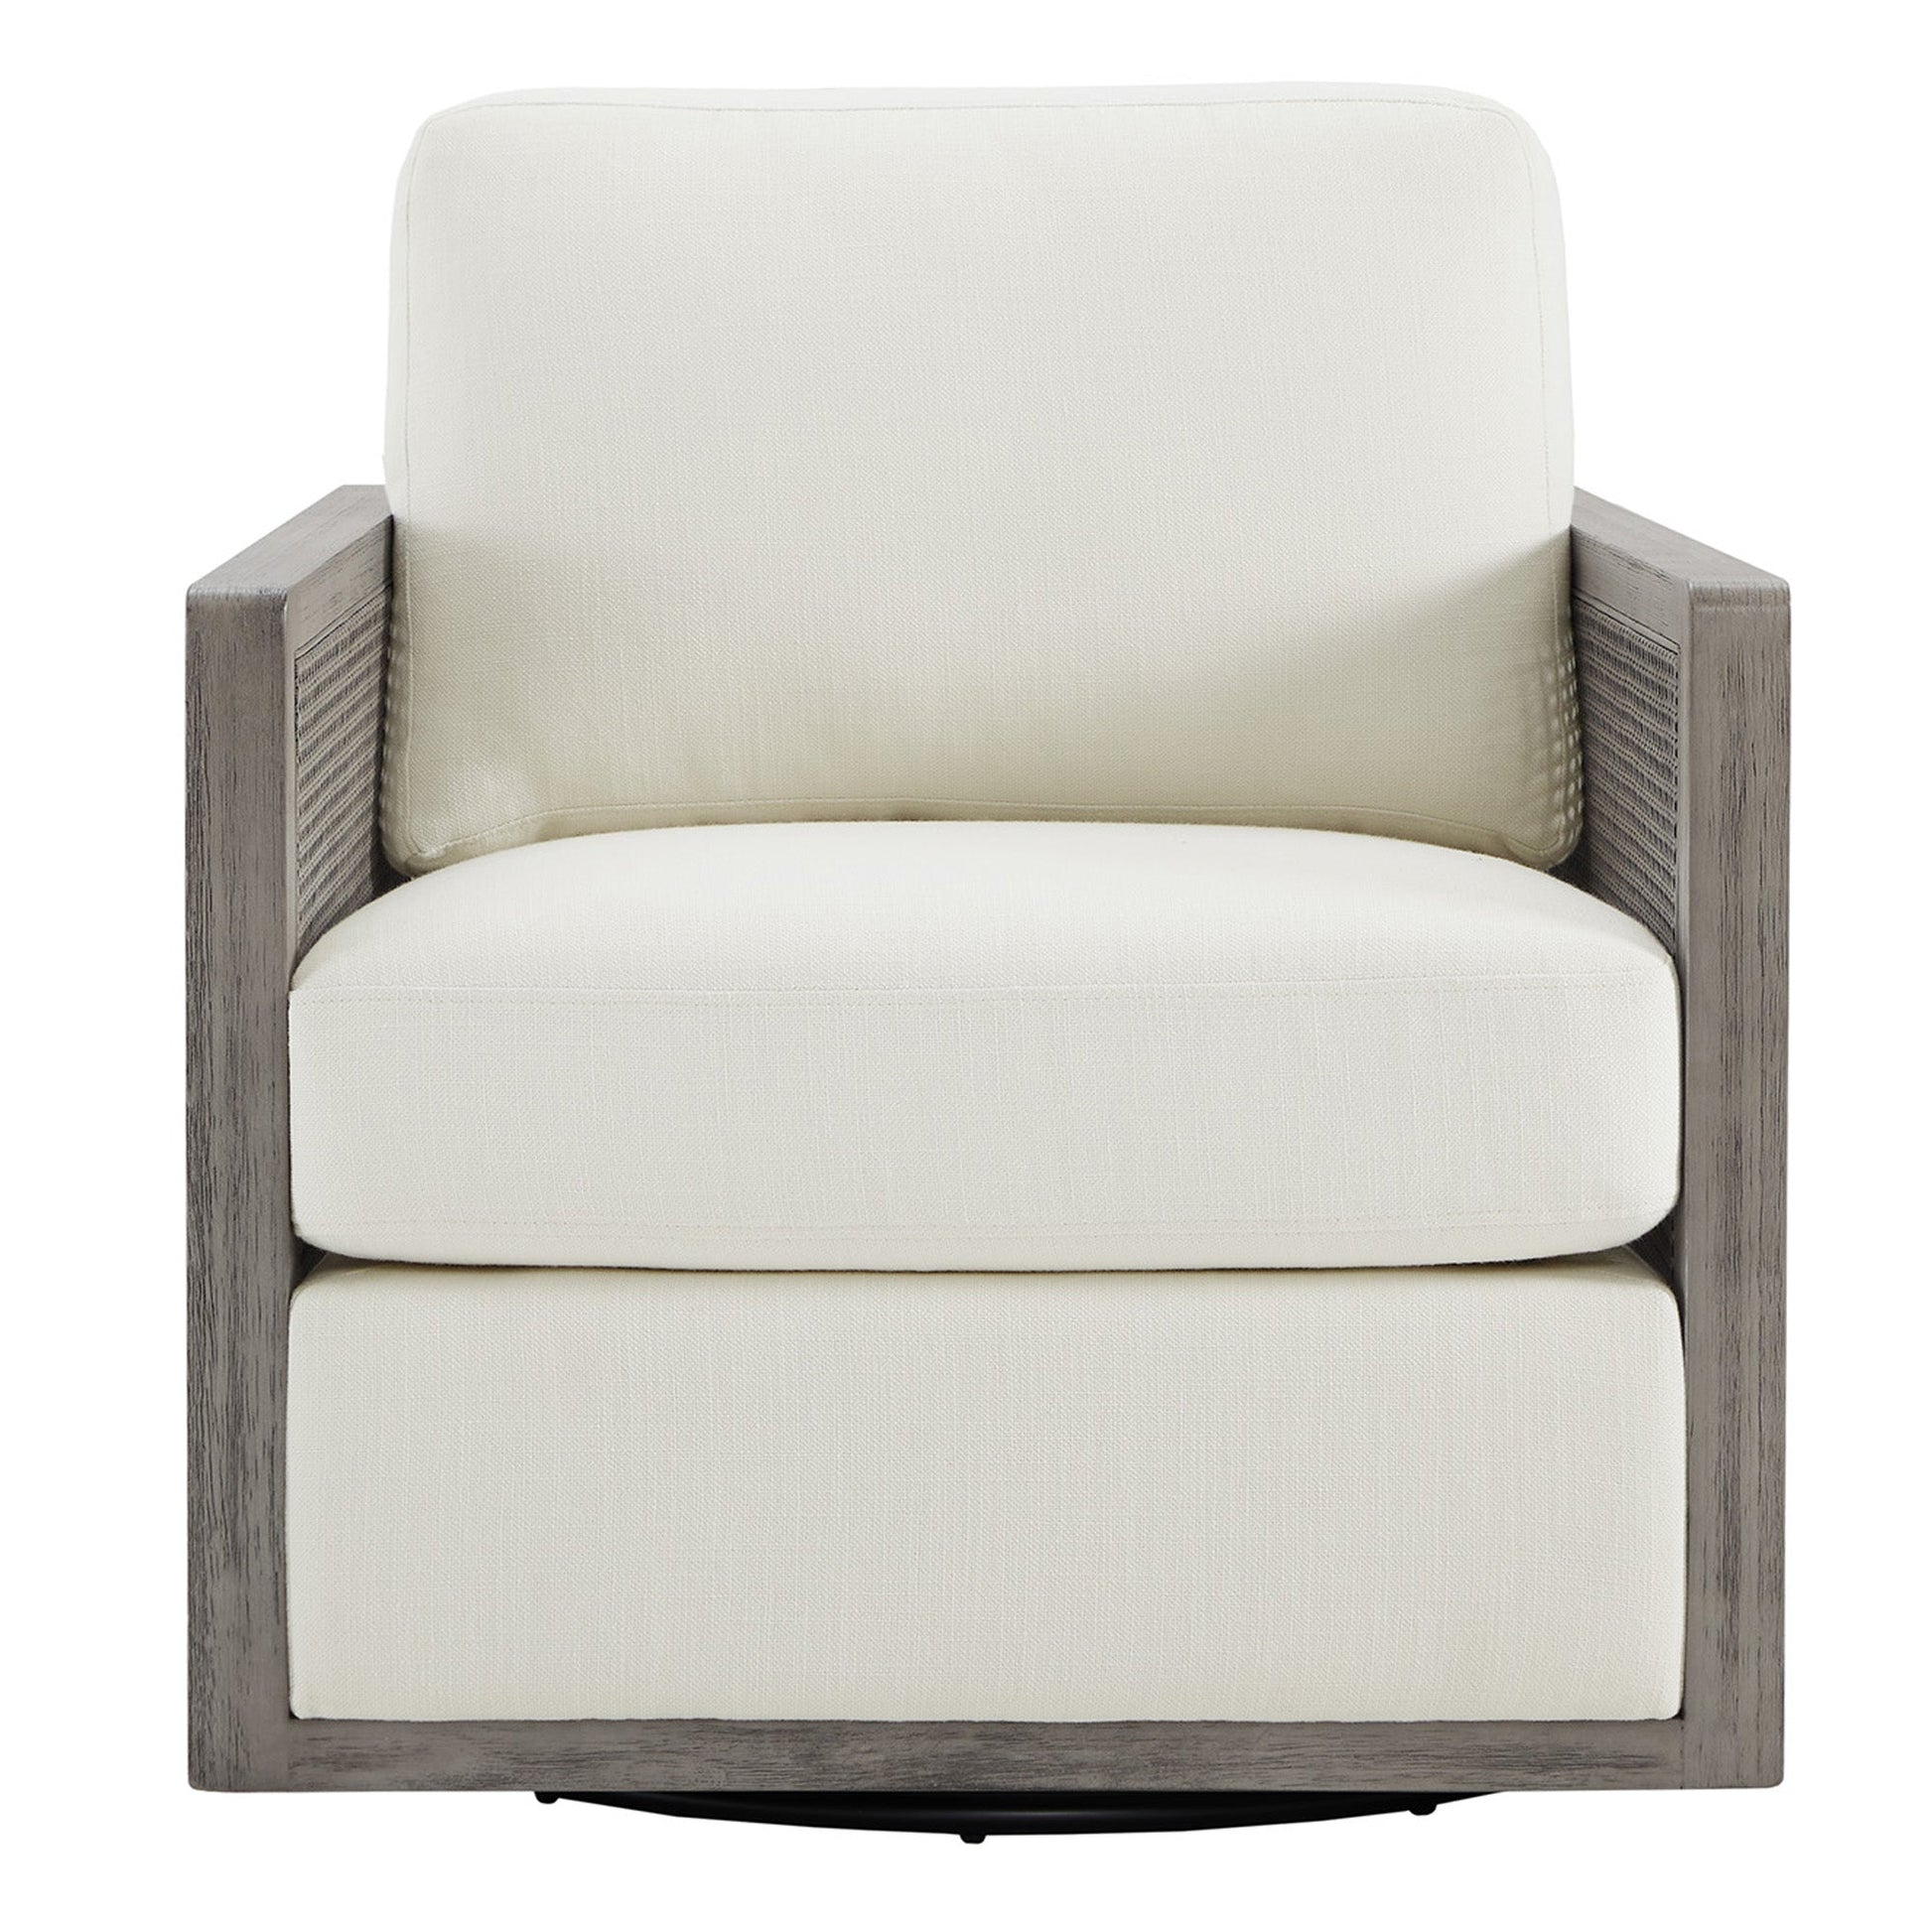 CHITA LIVING-Milly Classic Cane Swivel Armchair-Accent Chair-Gray-Cream-